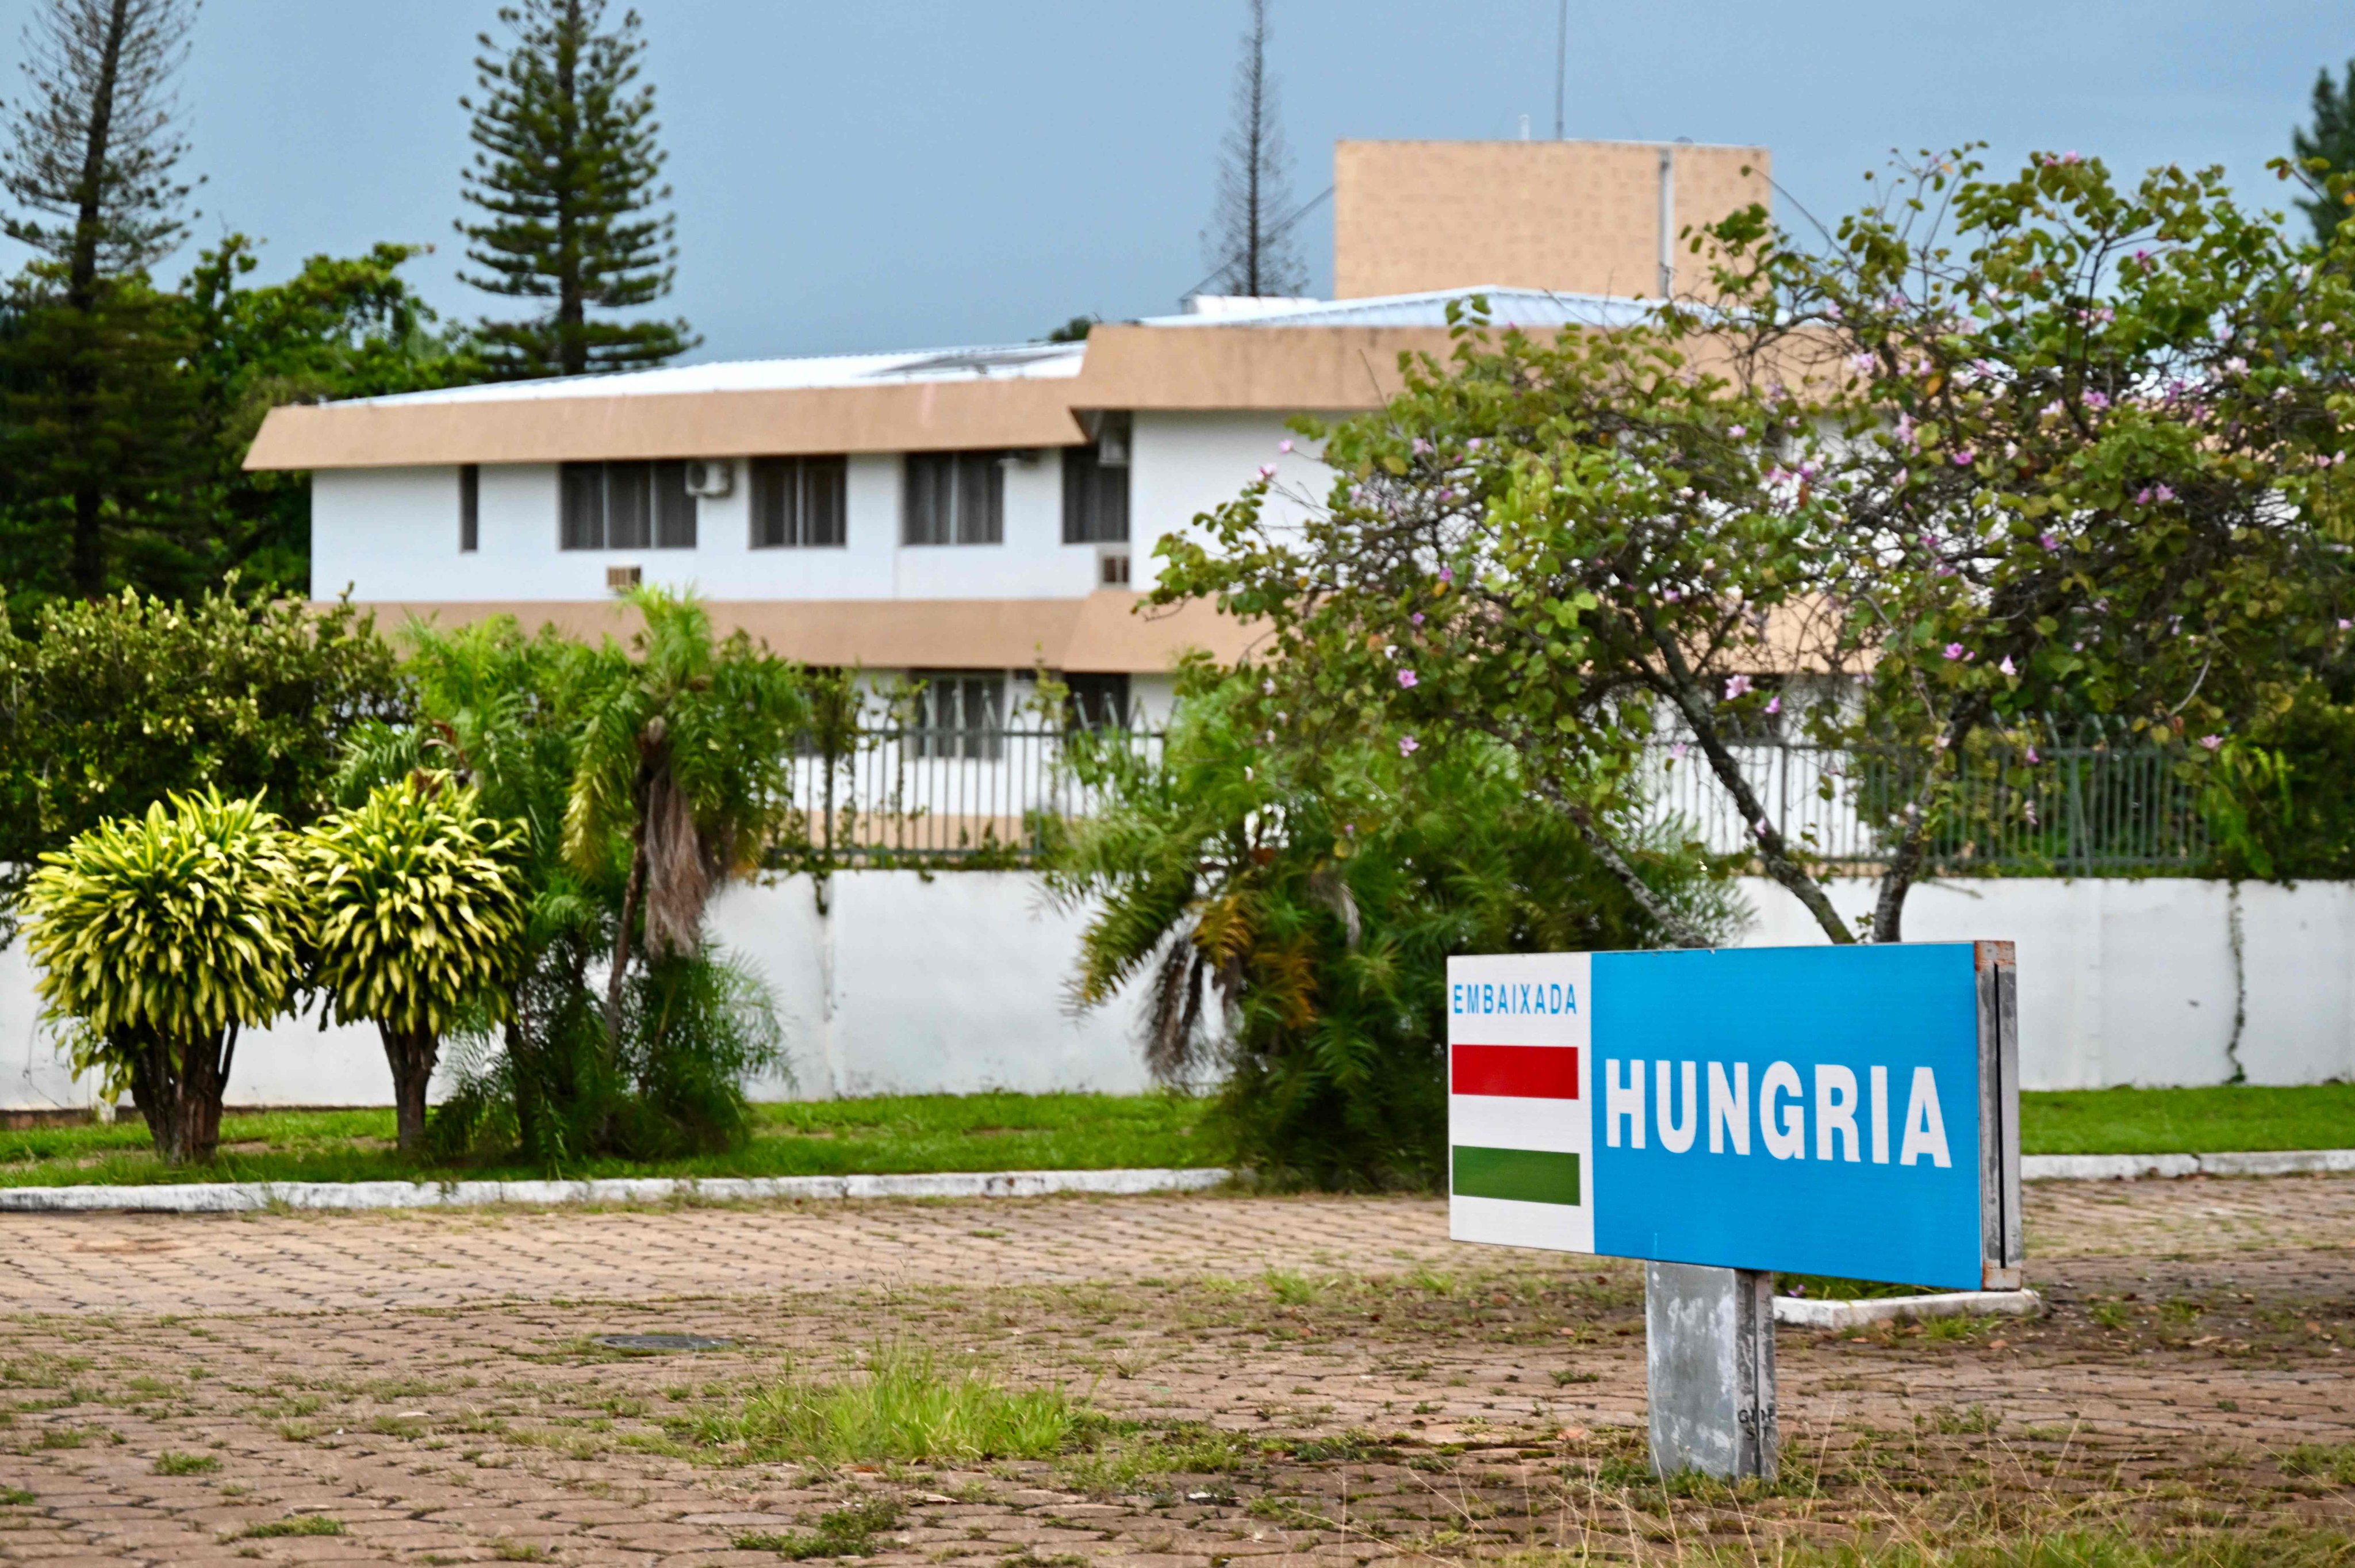 The Hungarian embassy in Brasilia, Brazil. Jair Bolsonaro was “hosted” for two days at the embassy, his lawyers said on Monday, denying he had taken refuge there to evade justice. Photo: AFP